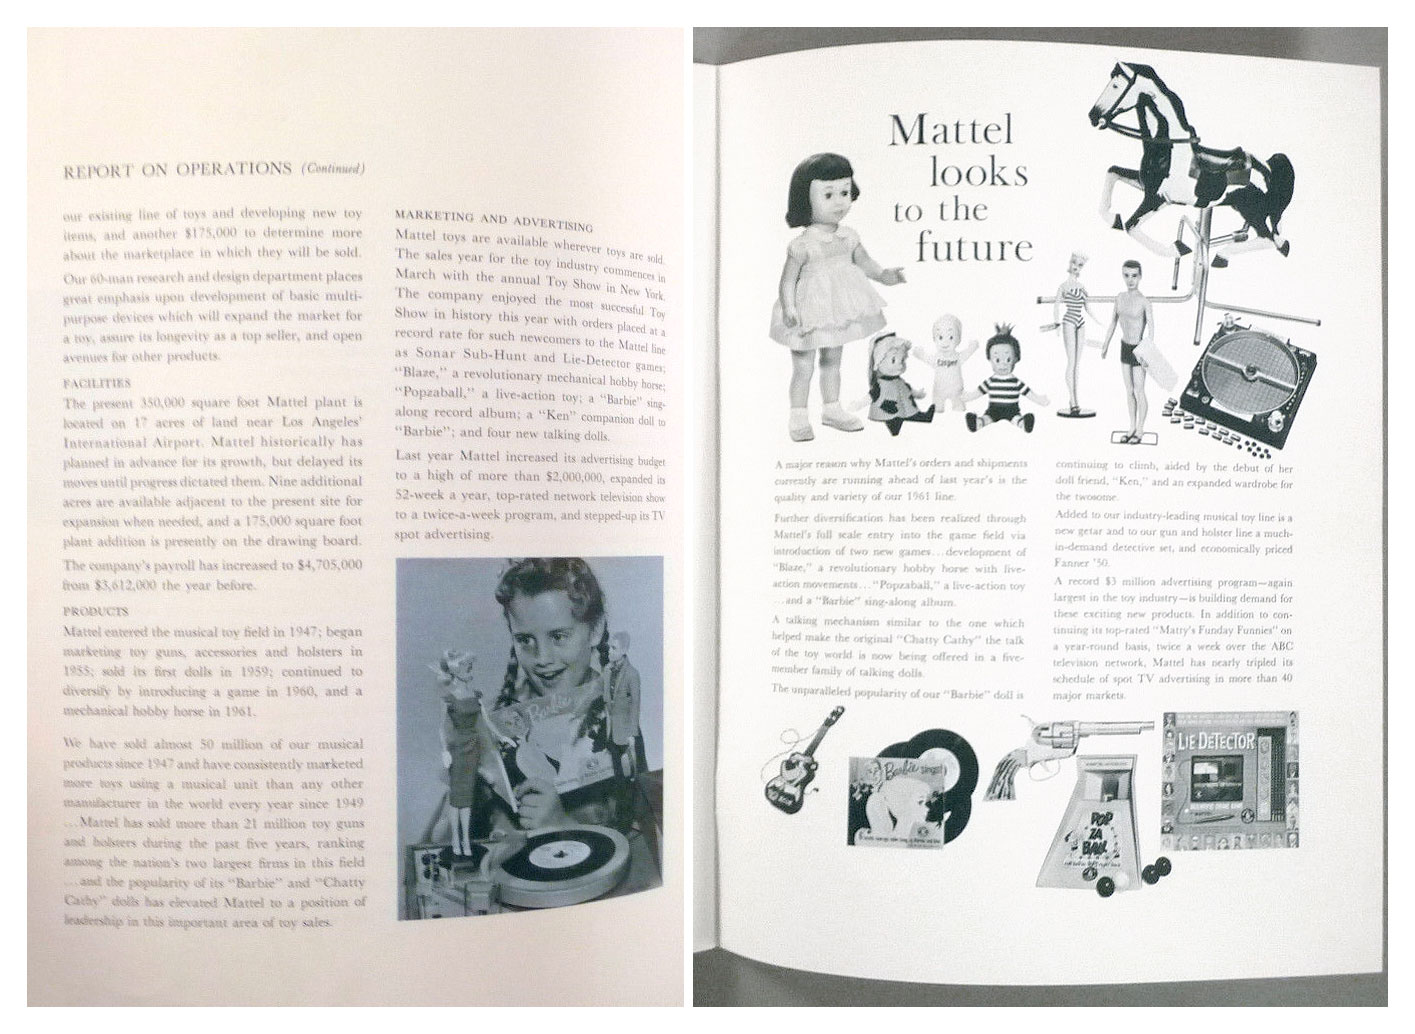 From Mattel Annual Report 1961